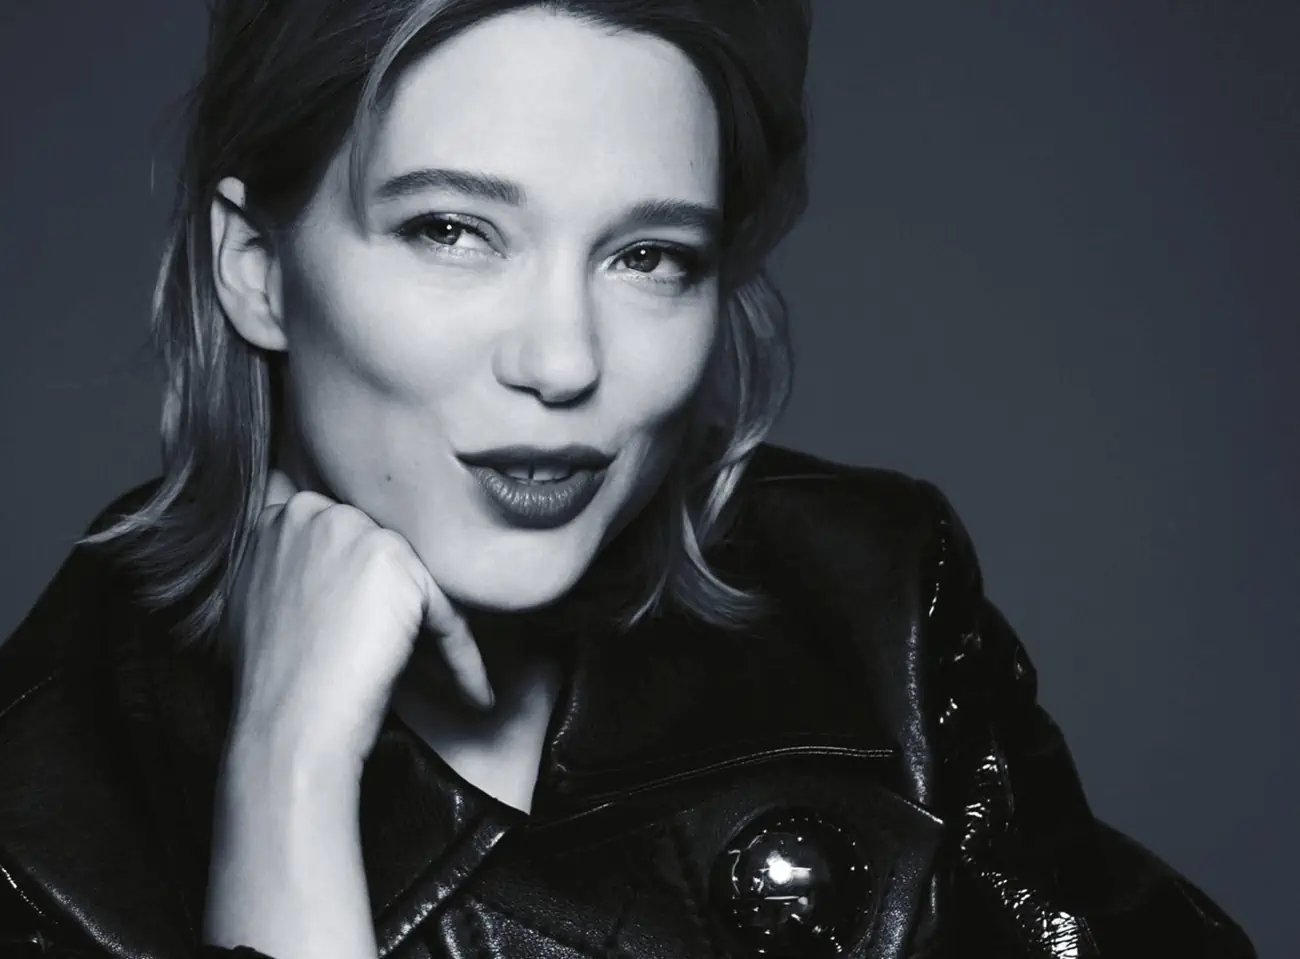 Léa Seydoux and Adèle Exarchopoulos cover Madame Figaro May 12th, 2023 by Tom Munro